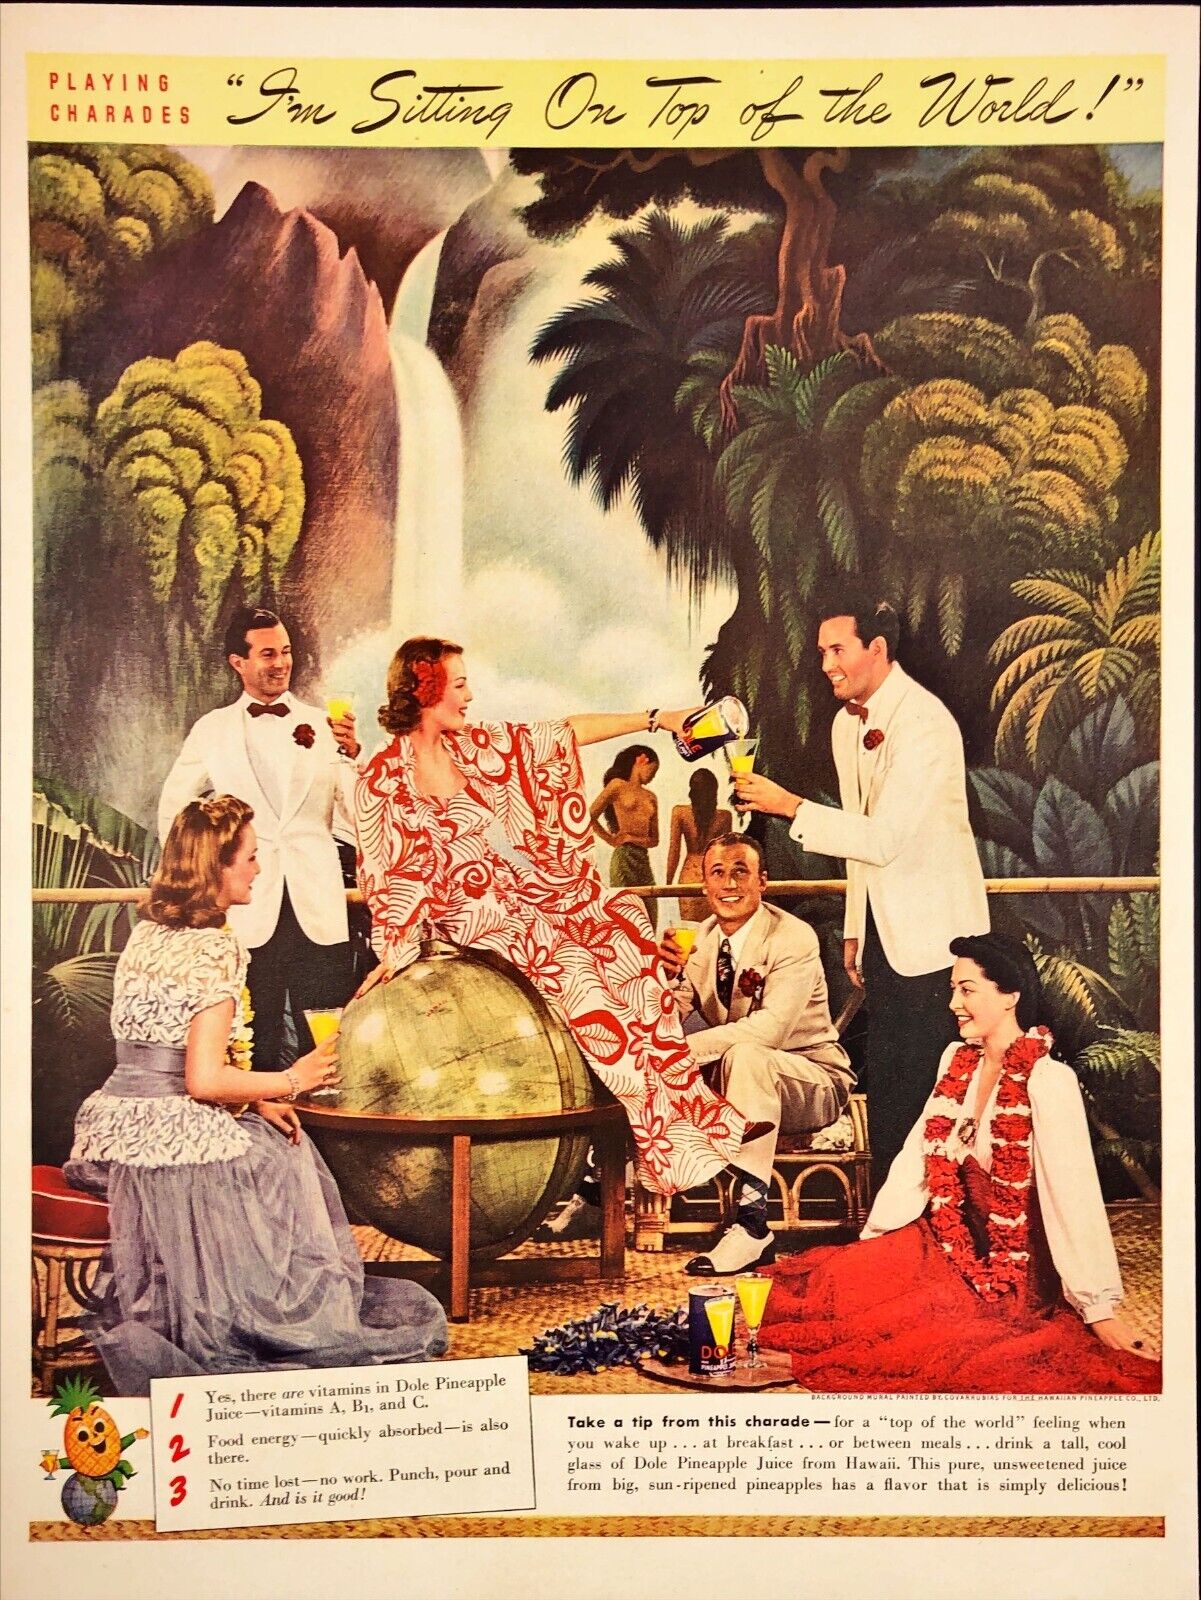 1941 Dole Pineapple Juice Hawaii Scenery Group Playing Charades Vintage Print Ad